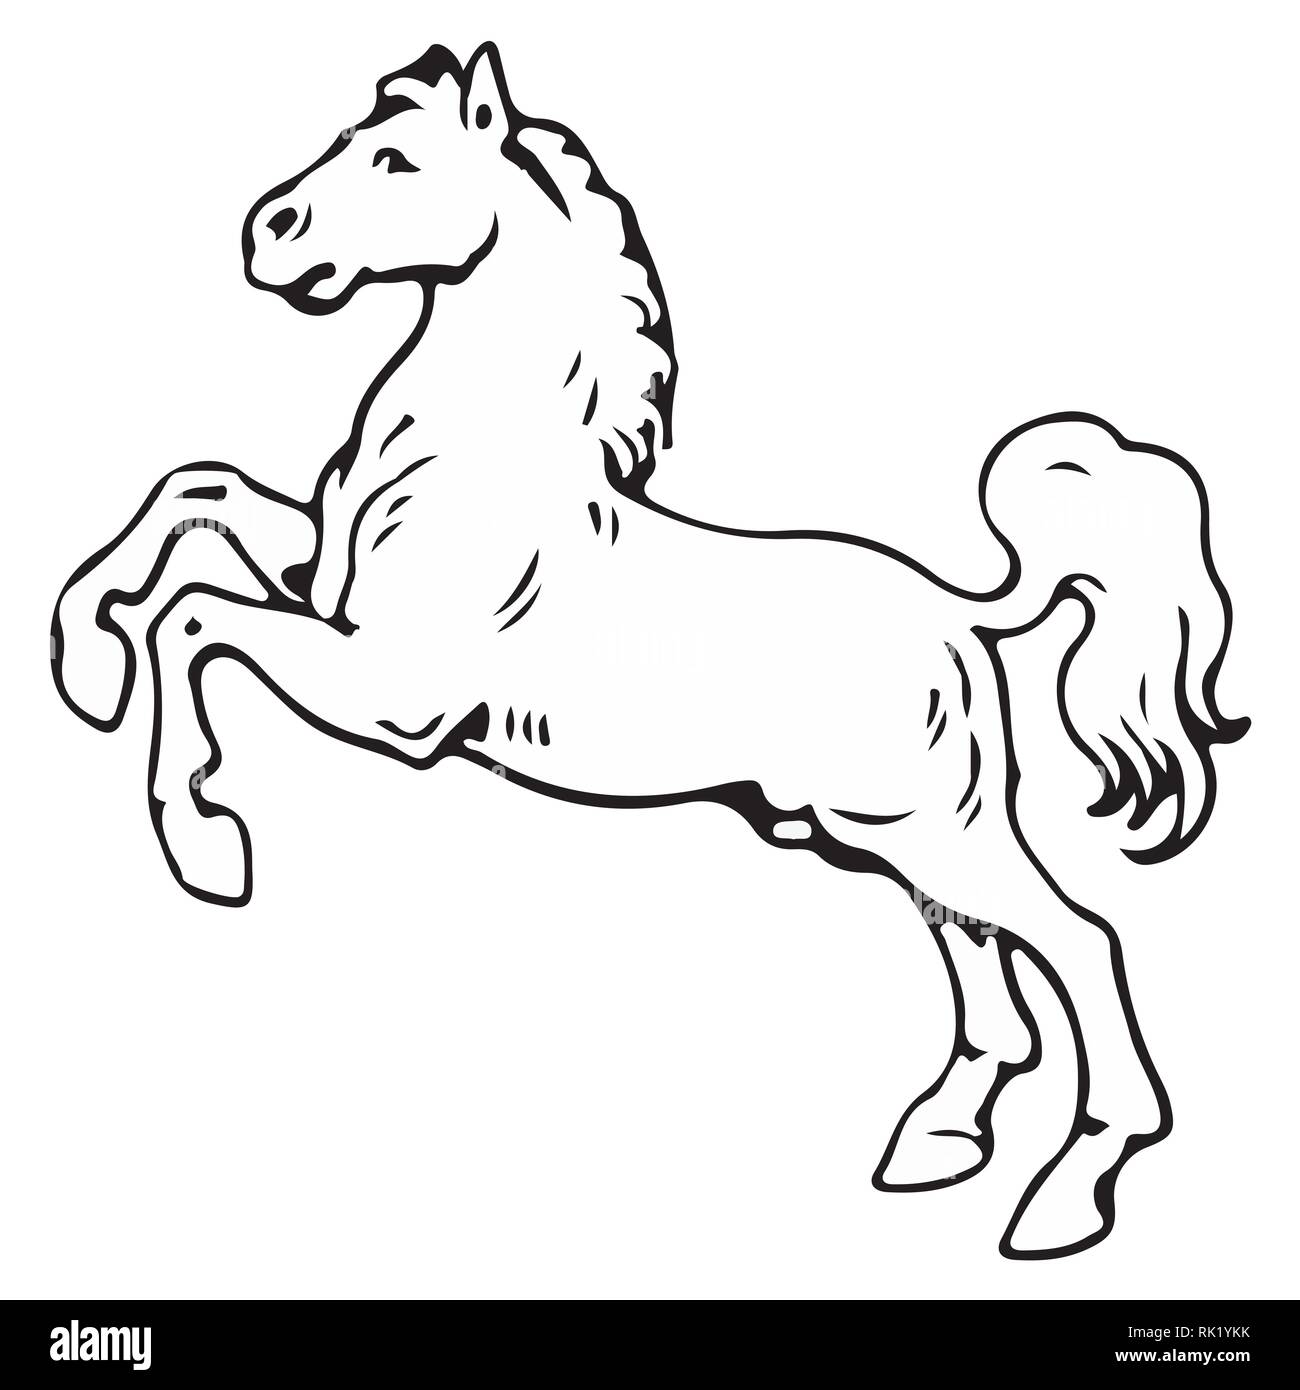 Rearing up horse monochrome silhouette. Can be used for logo, emblem or heraldry design concept Stock Vector